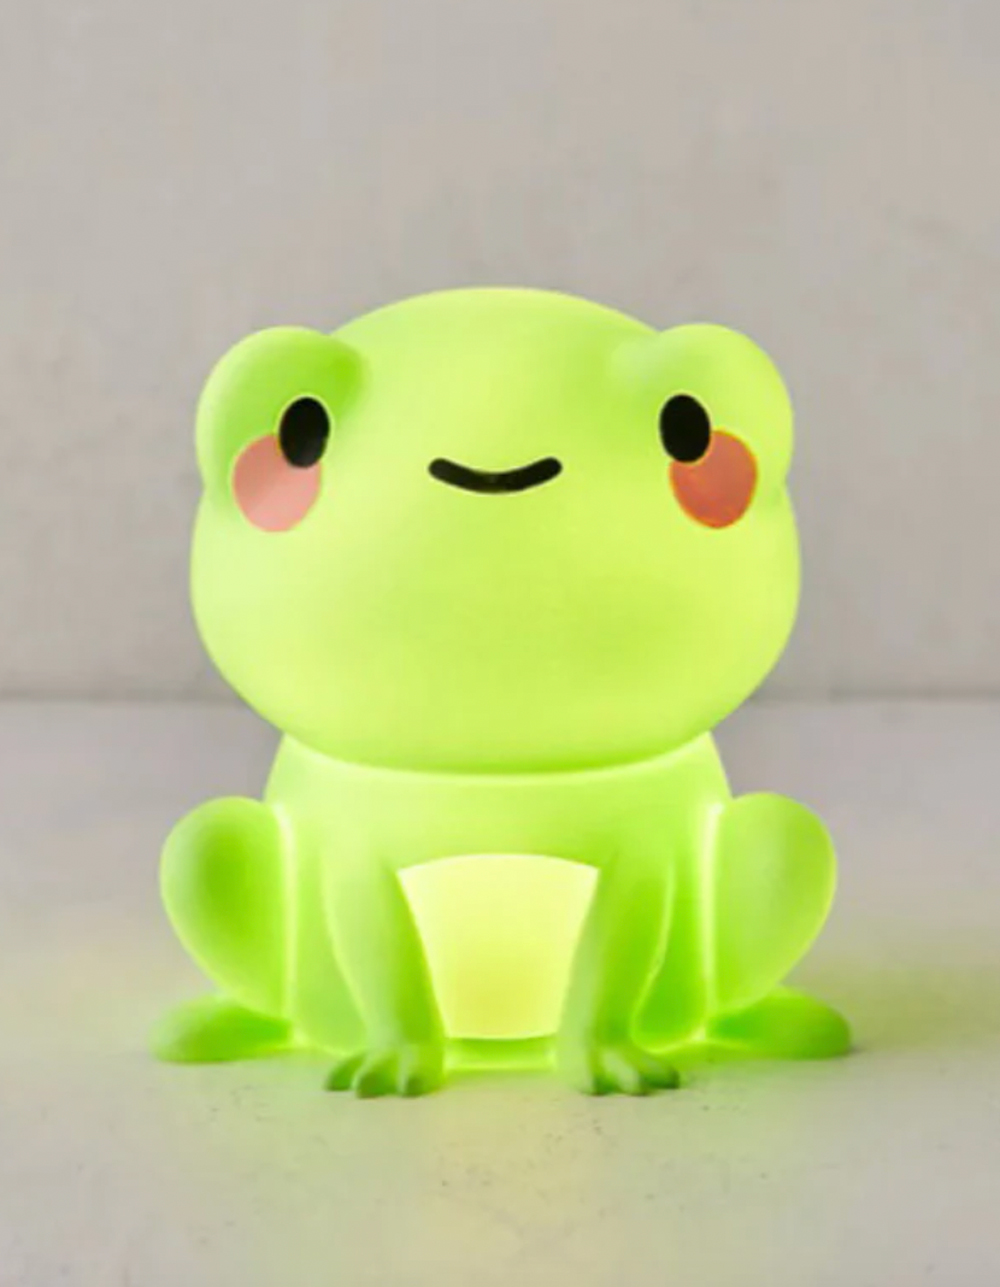 Squishy Toys Kids Frog, Frogs Children Toys, Slow Rising Squishy